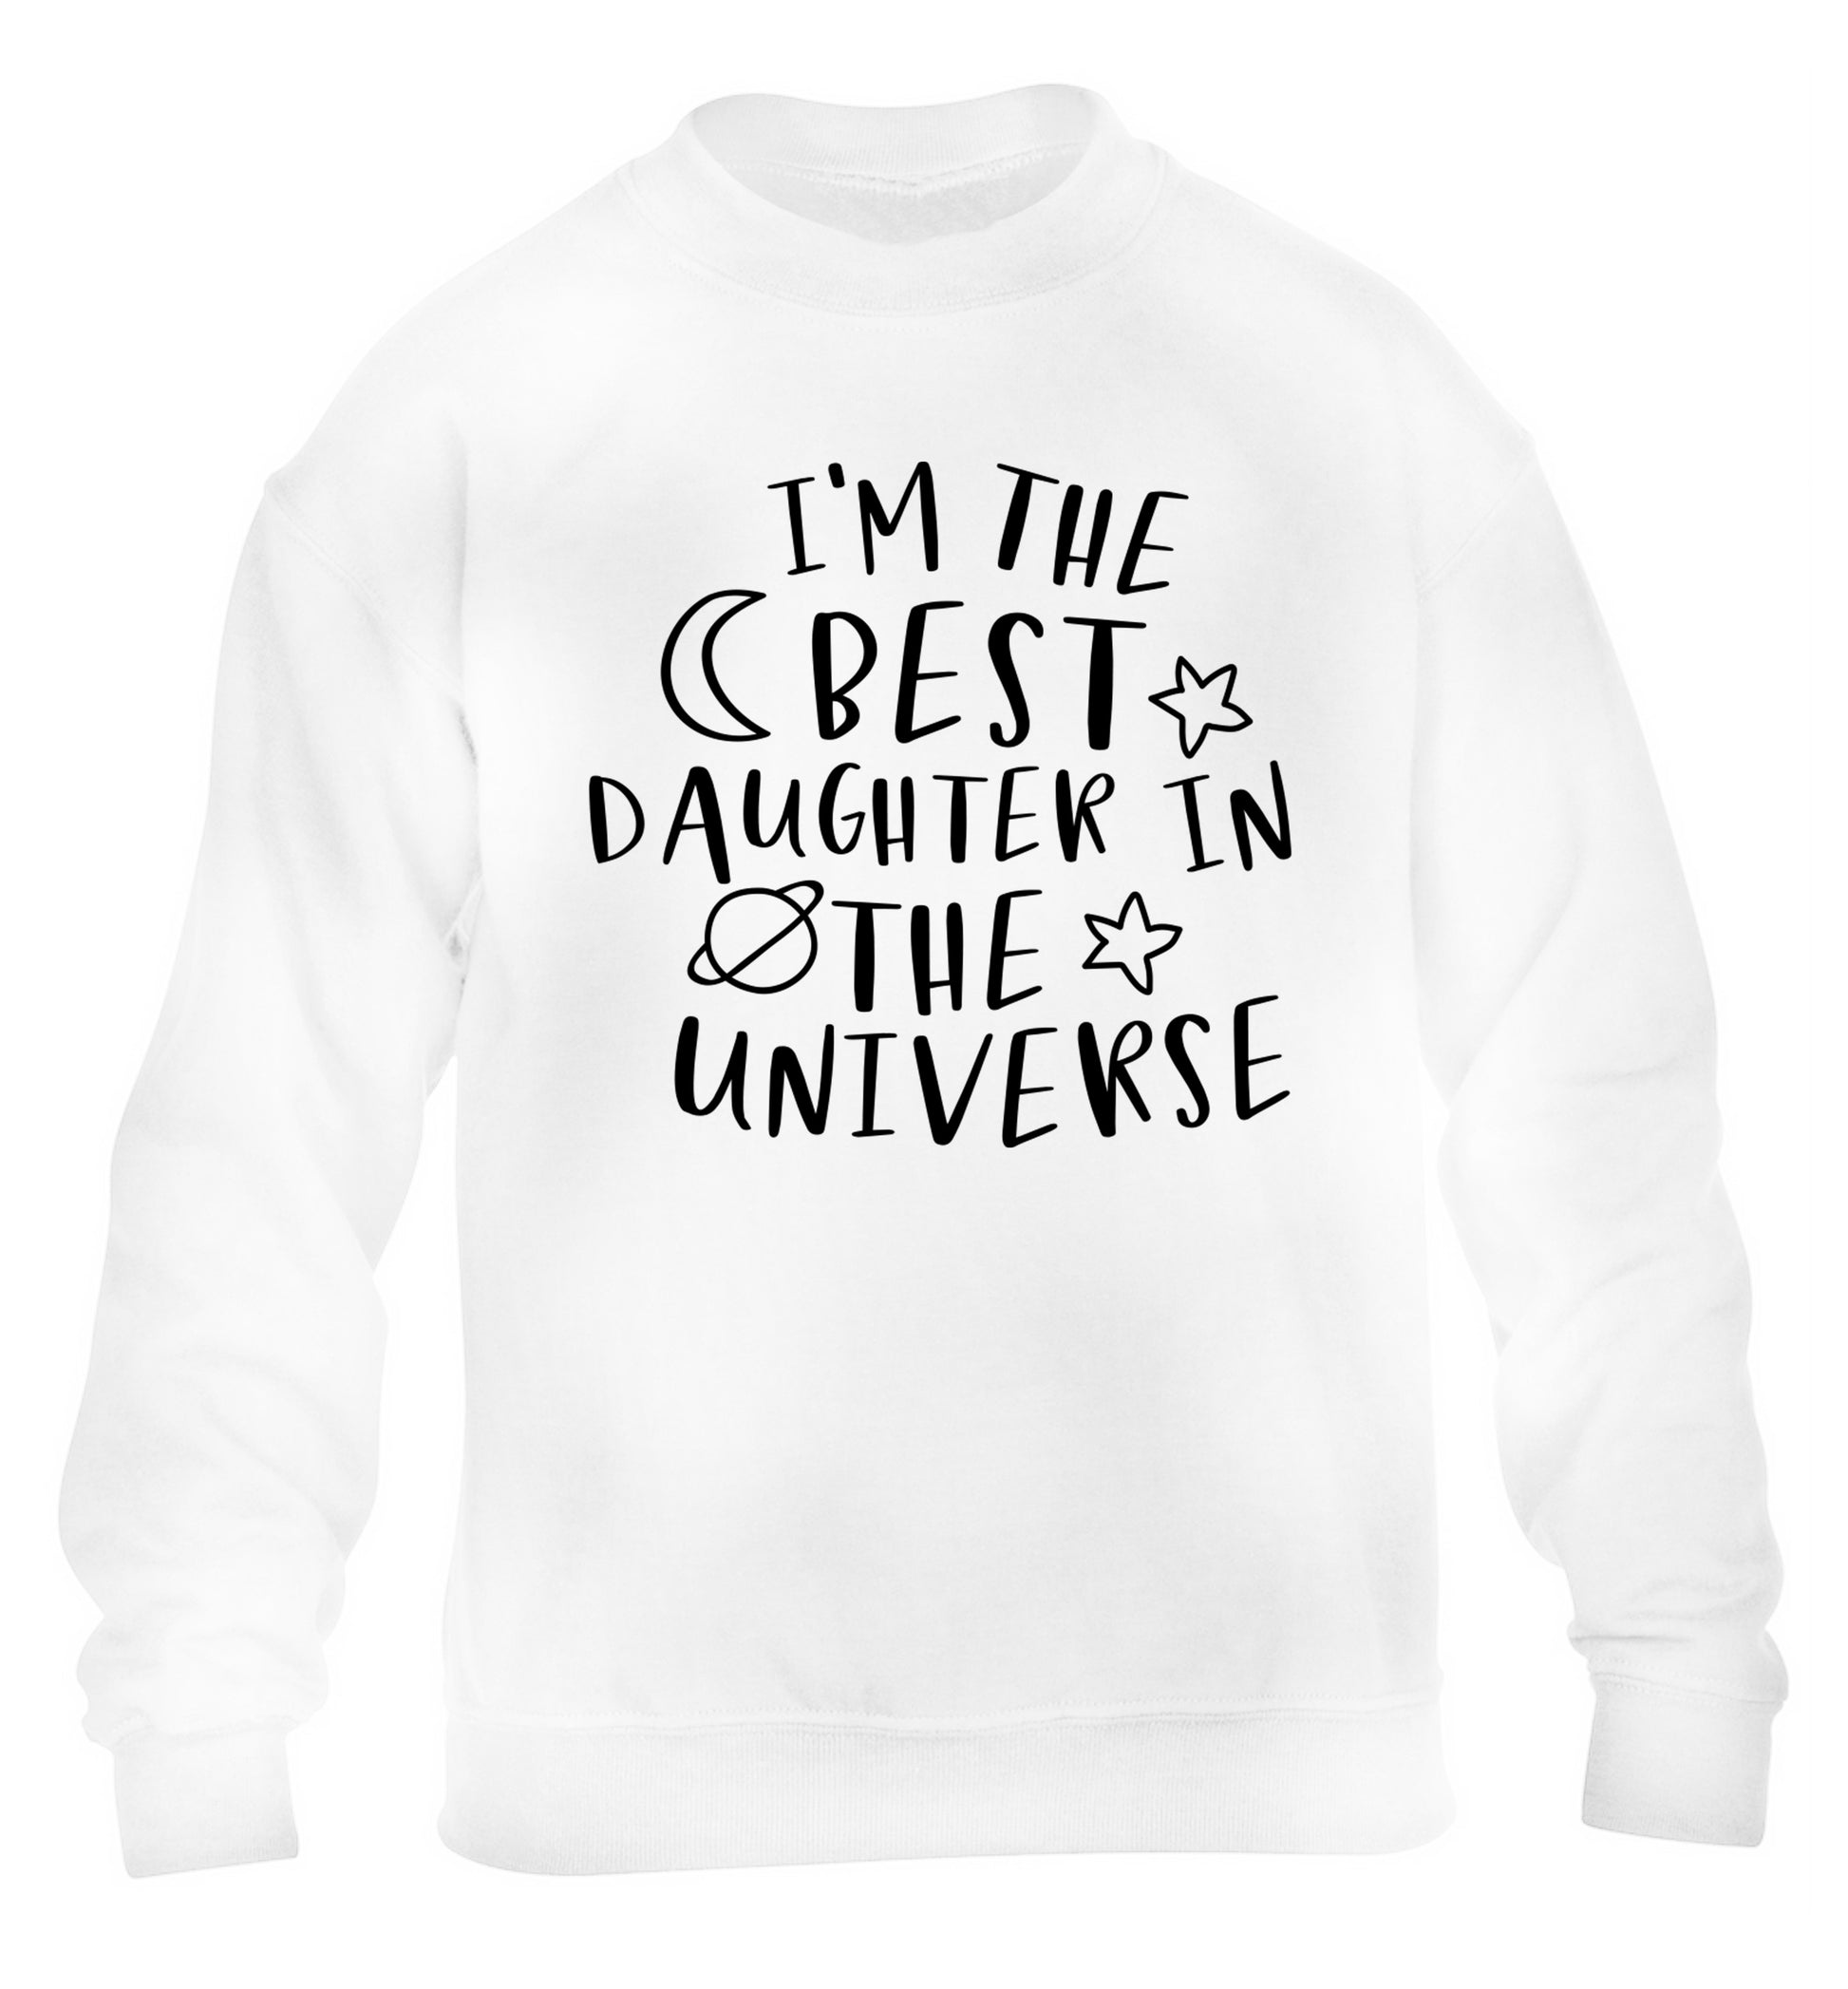 I'm the best daughter in the universe children's white sweater 12-13 Years